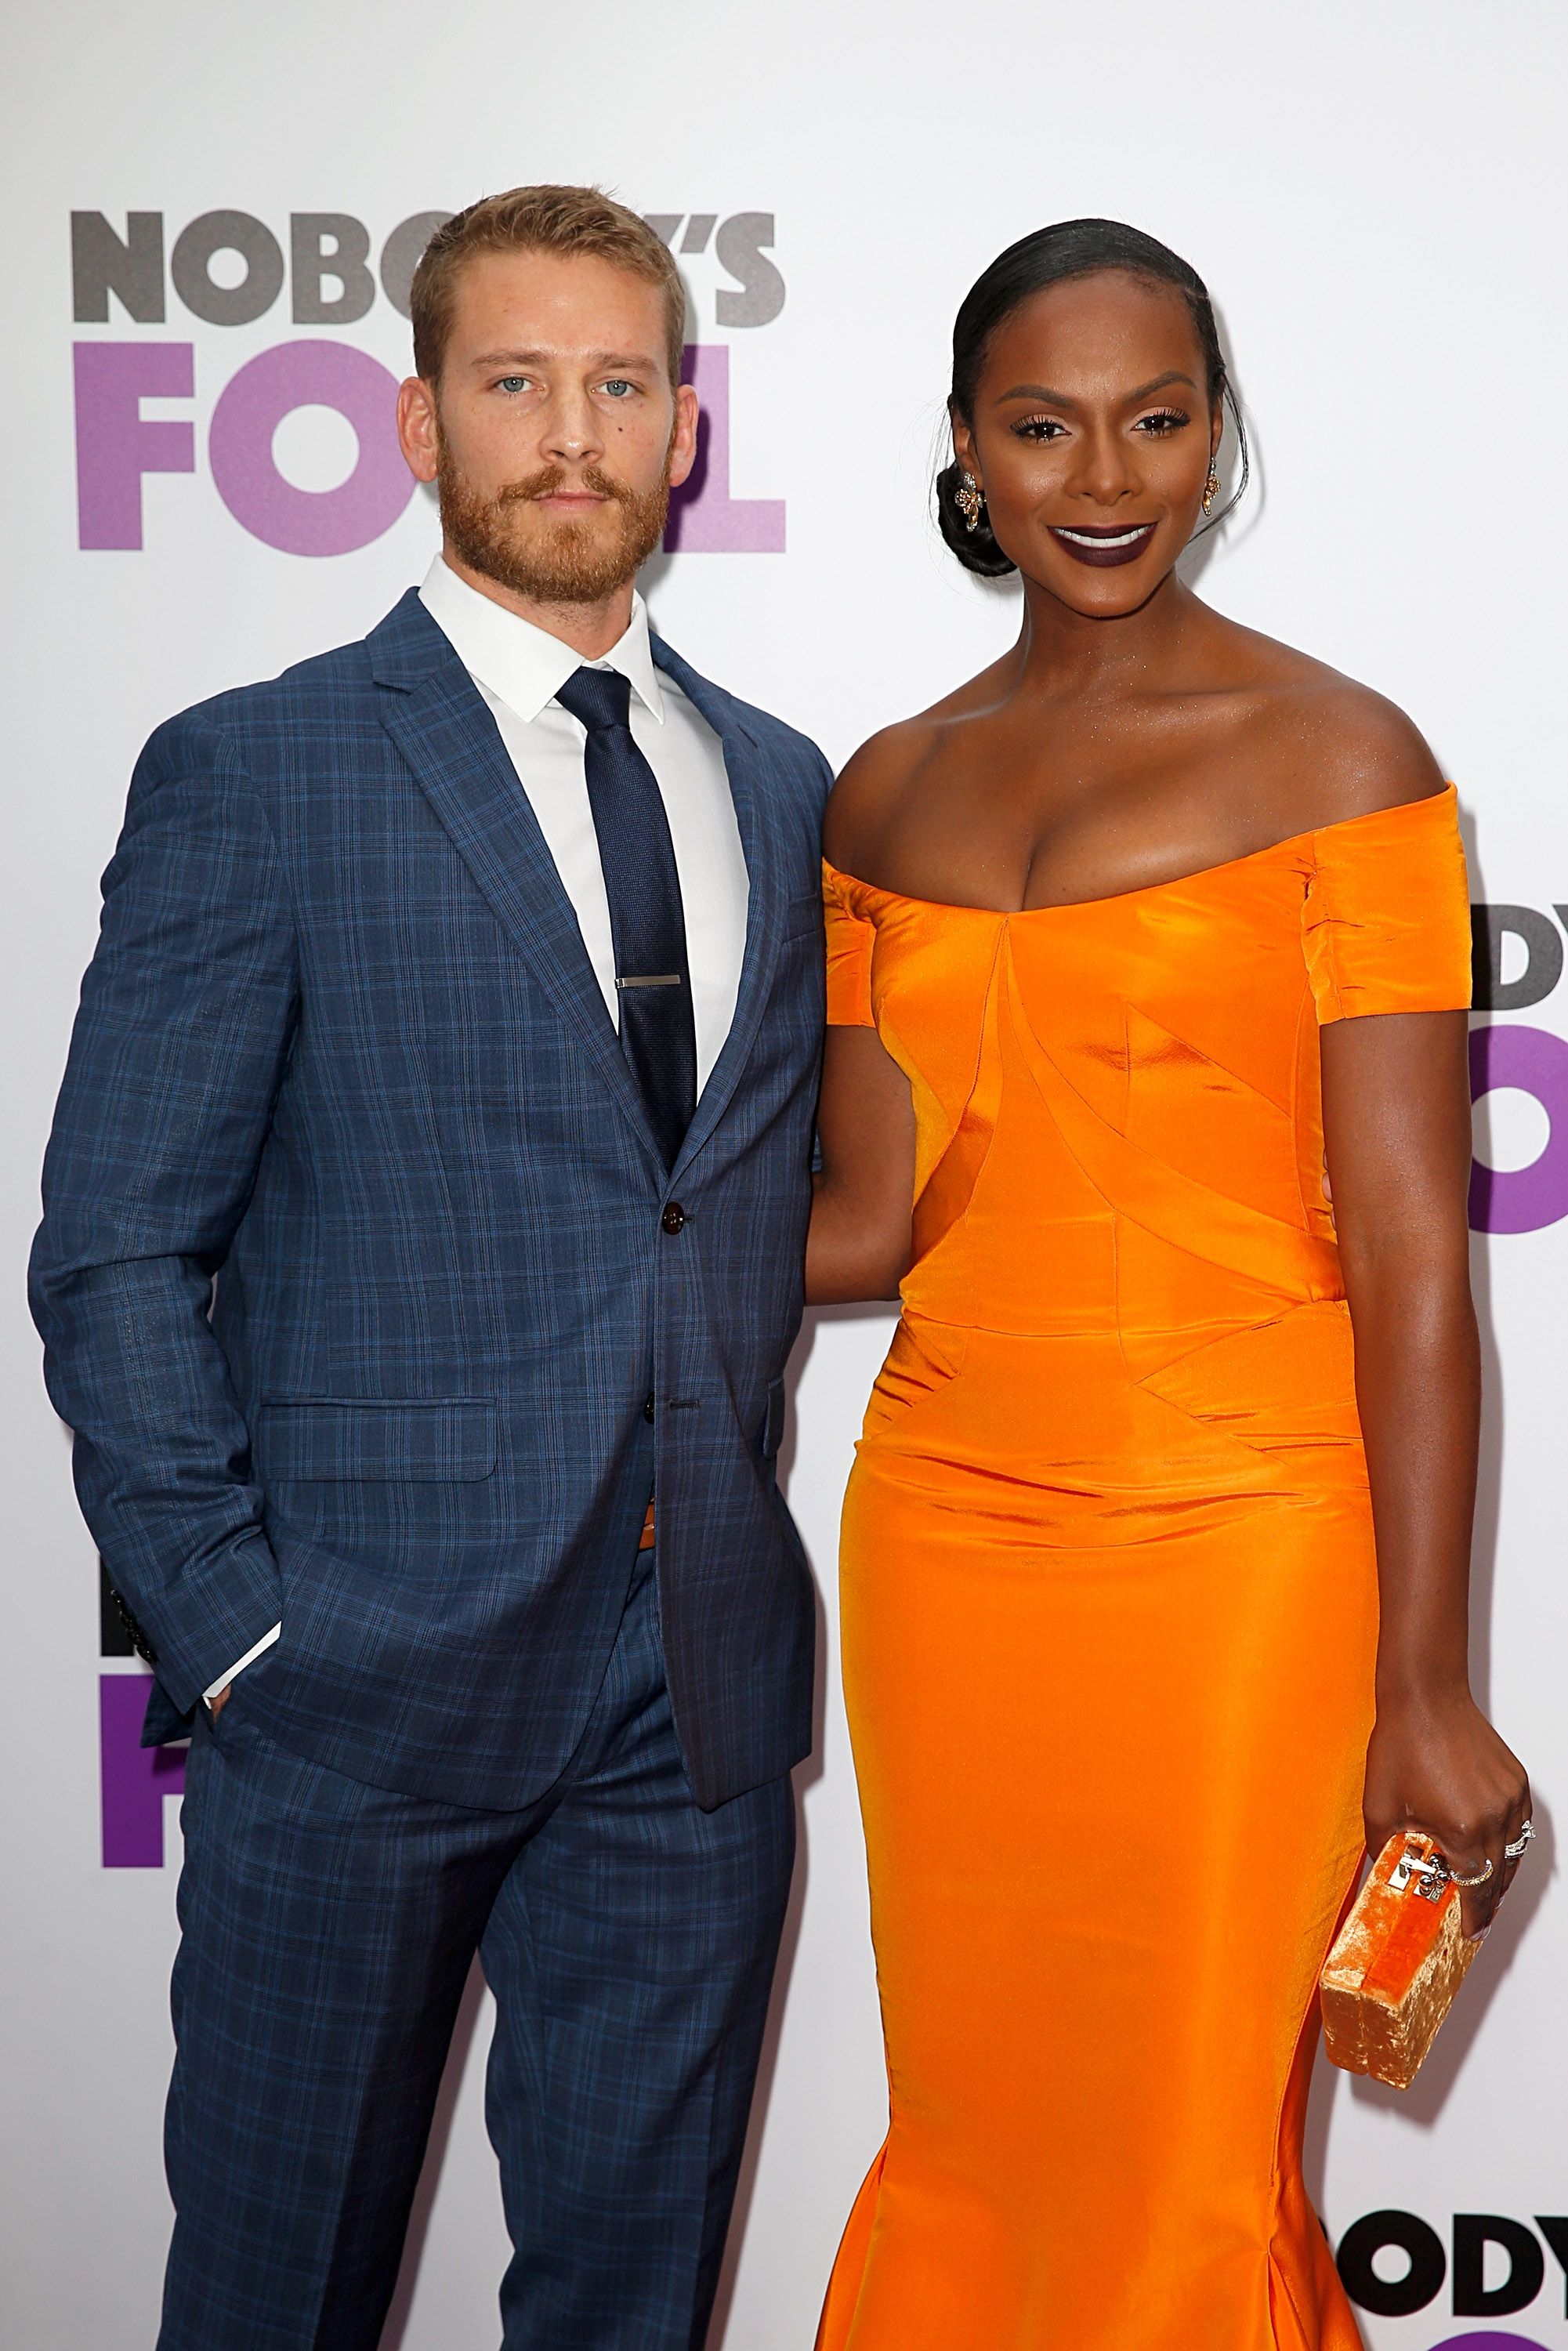 Nicholas James and Tika Sumpter during the premiere of "Nobody's Fool"  in New York City on October 28, 2018. | Photo: Getty Images